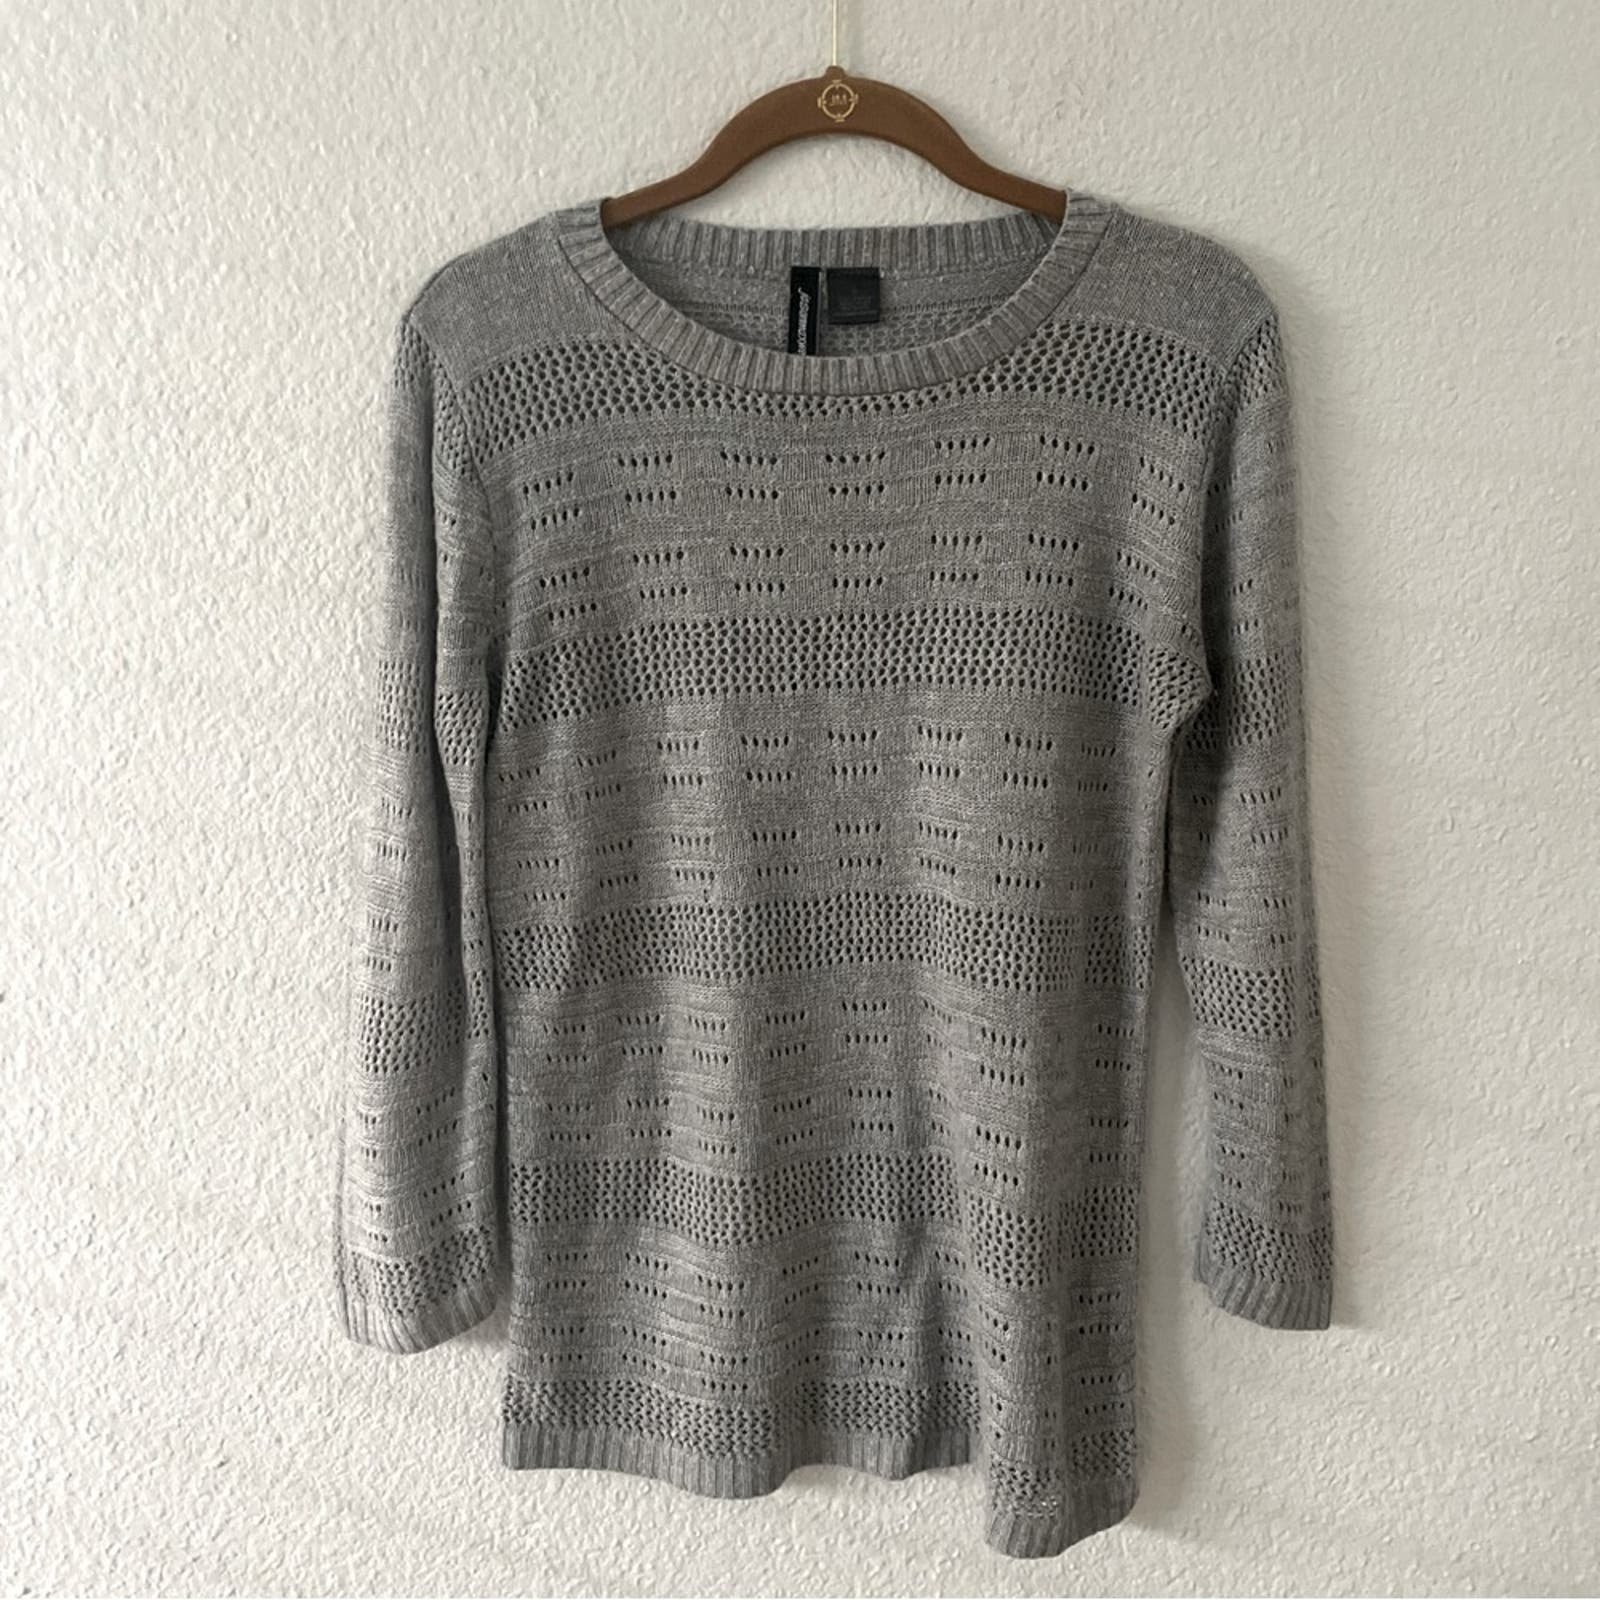 Popular light Grey Open Knit Sweater Top Size Small iCn